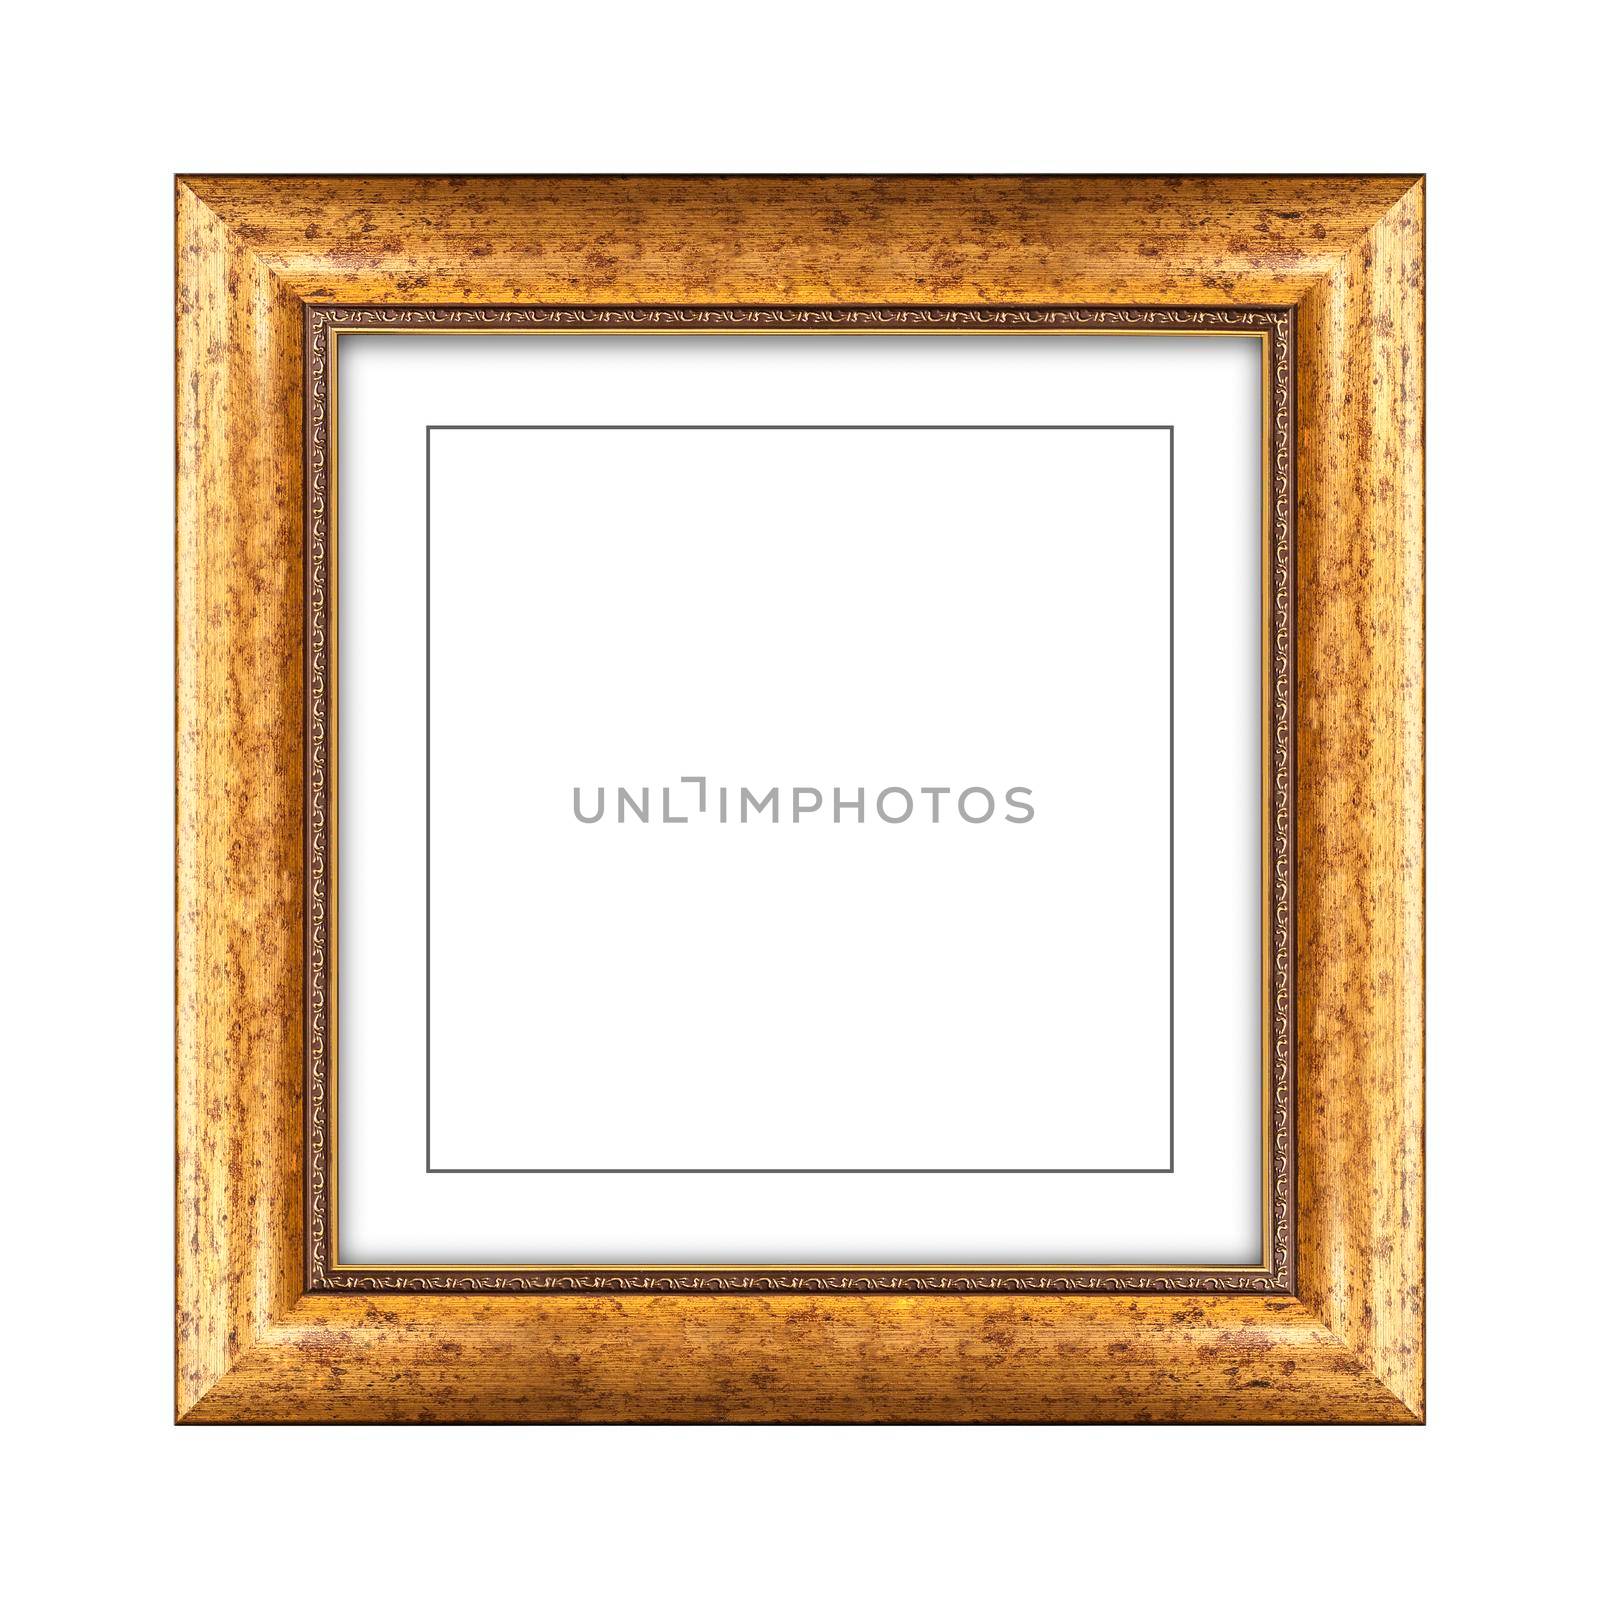 wooden frame for picture or photo, frame for a mirror isolated on white background. With clipping path